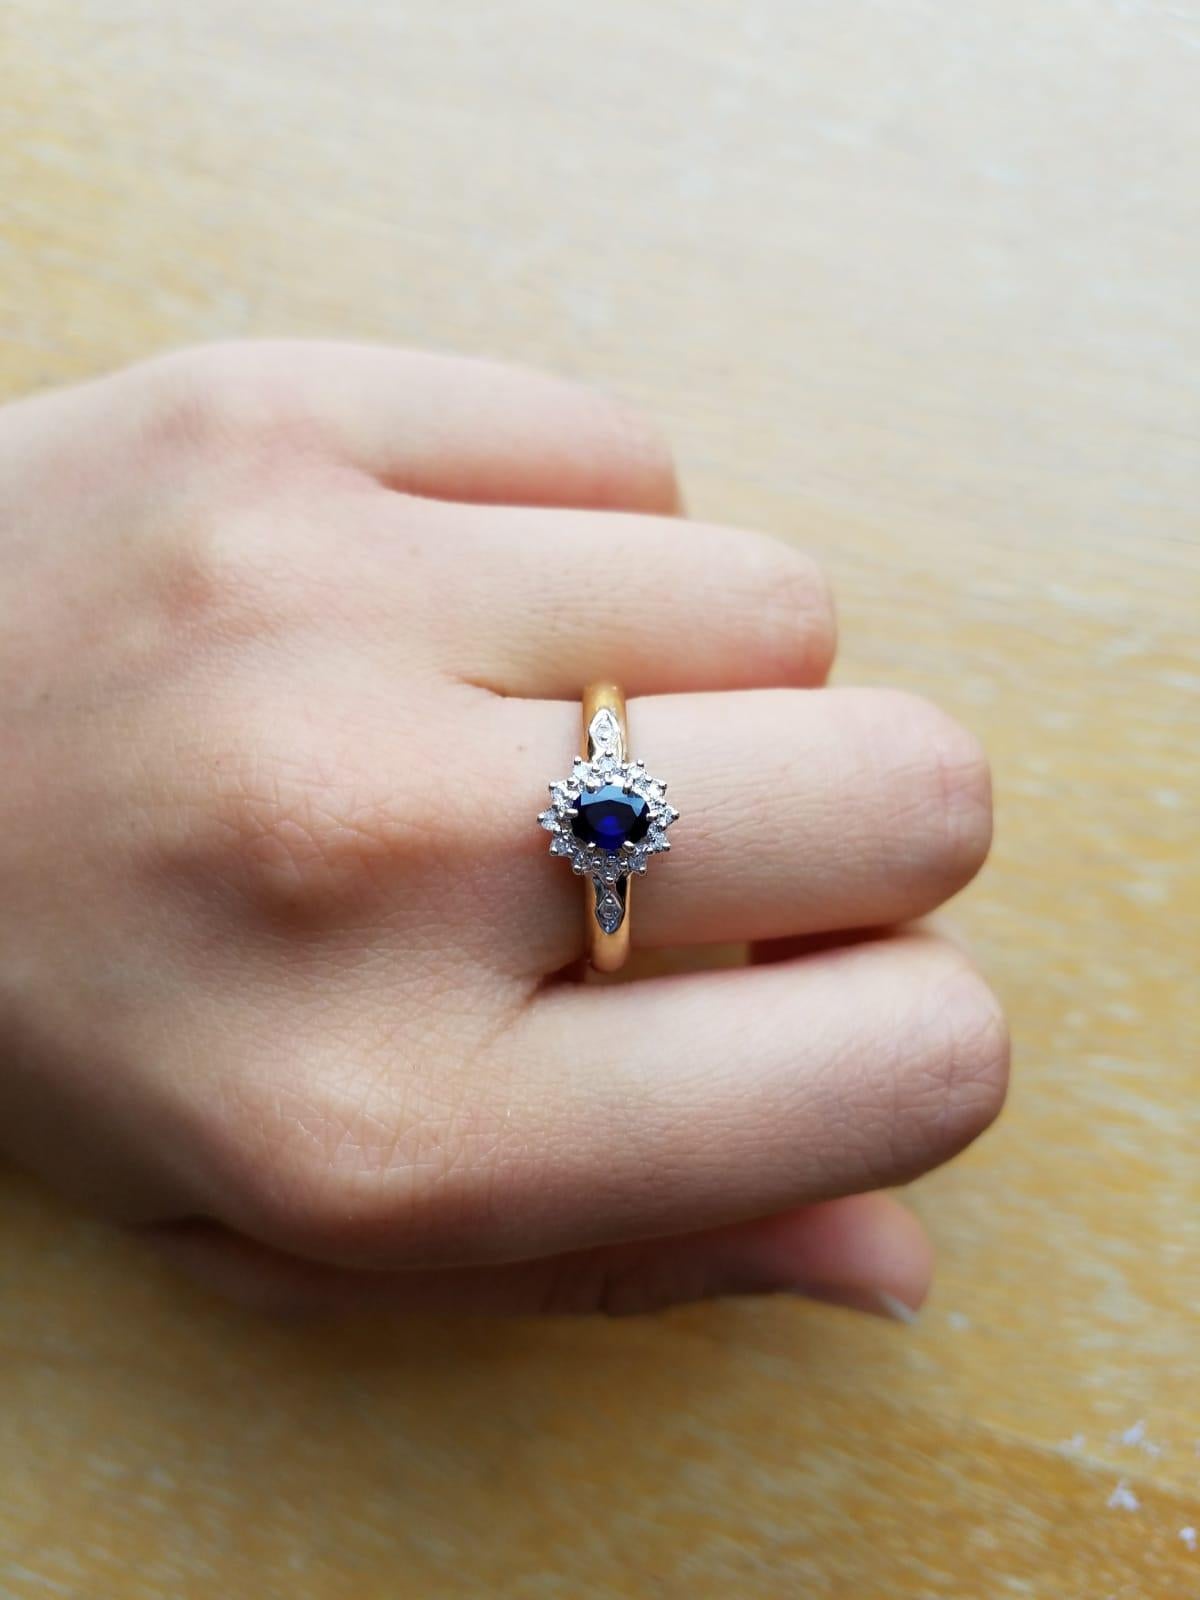 An elegant and simple ring using a lustrous Blue Sapphire centre stone surrounded by brilliant cut white Diamonds, all set in 14K white and yellow gold. Currently a ring size US 6.5, but we can resize the ring for you without additional cost.